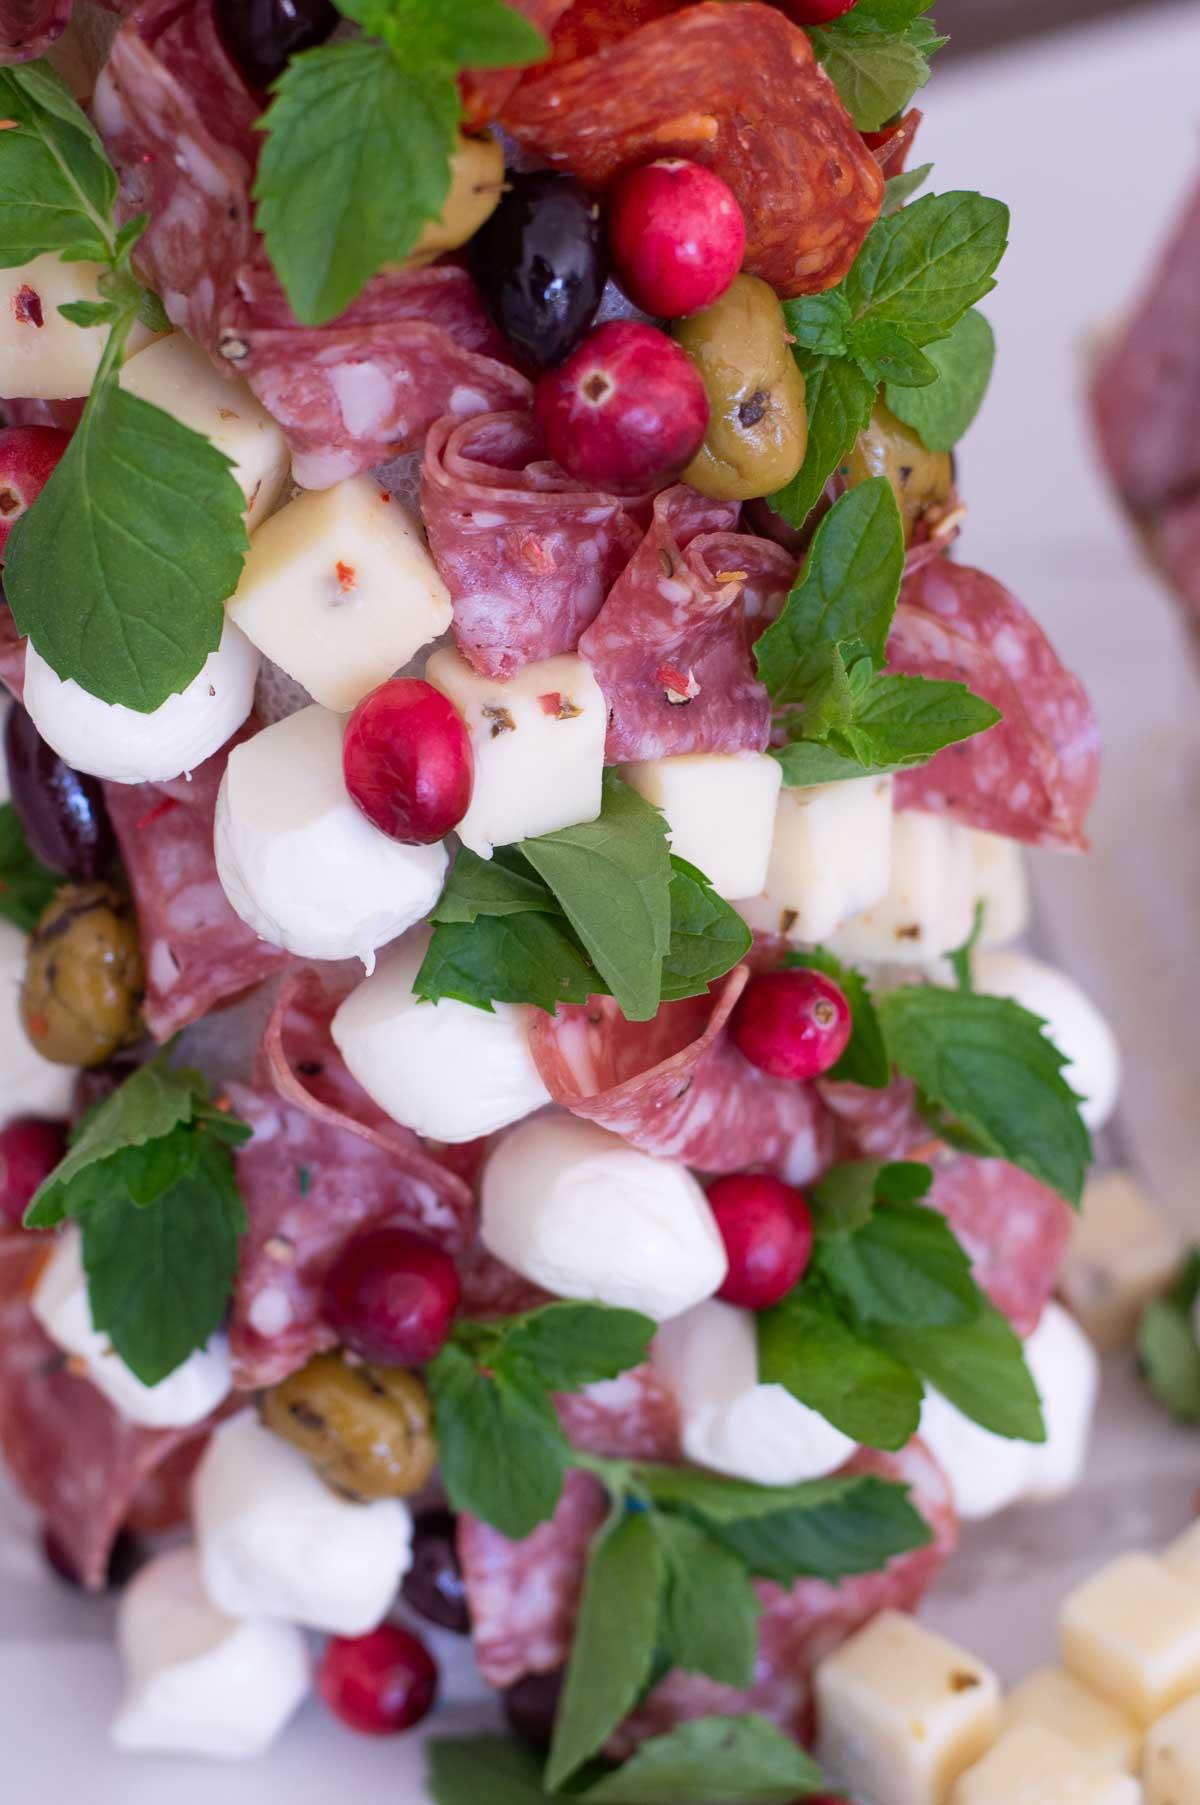 How to make a charcuterie tree cheese, salami, mint and cranberries on a styrofoam tree